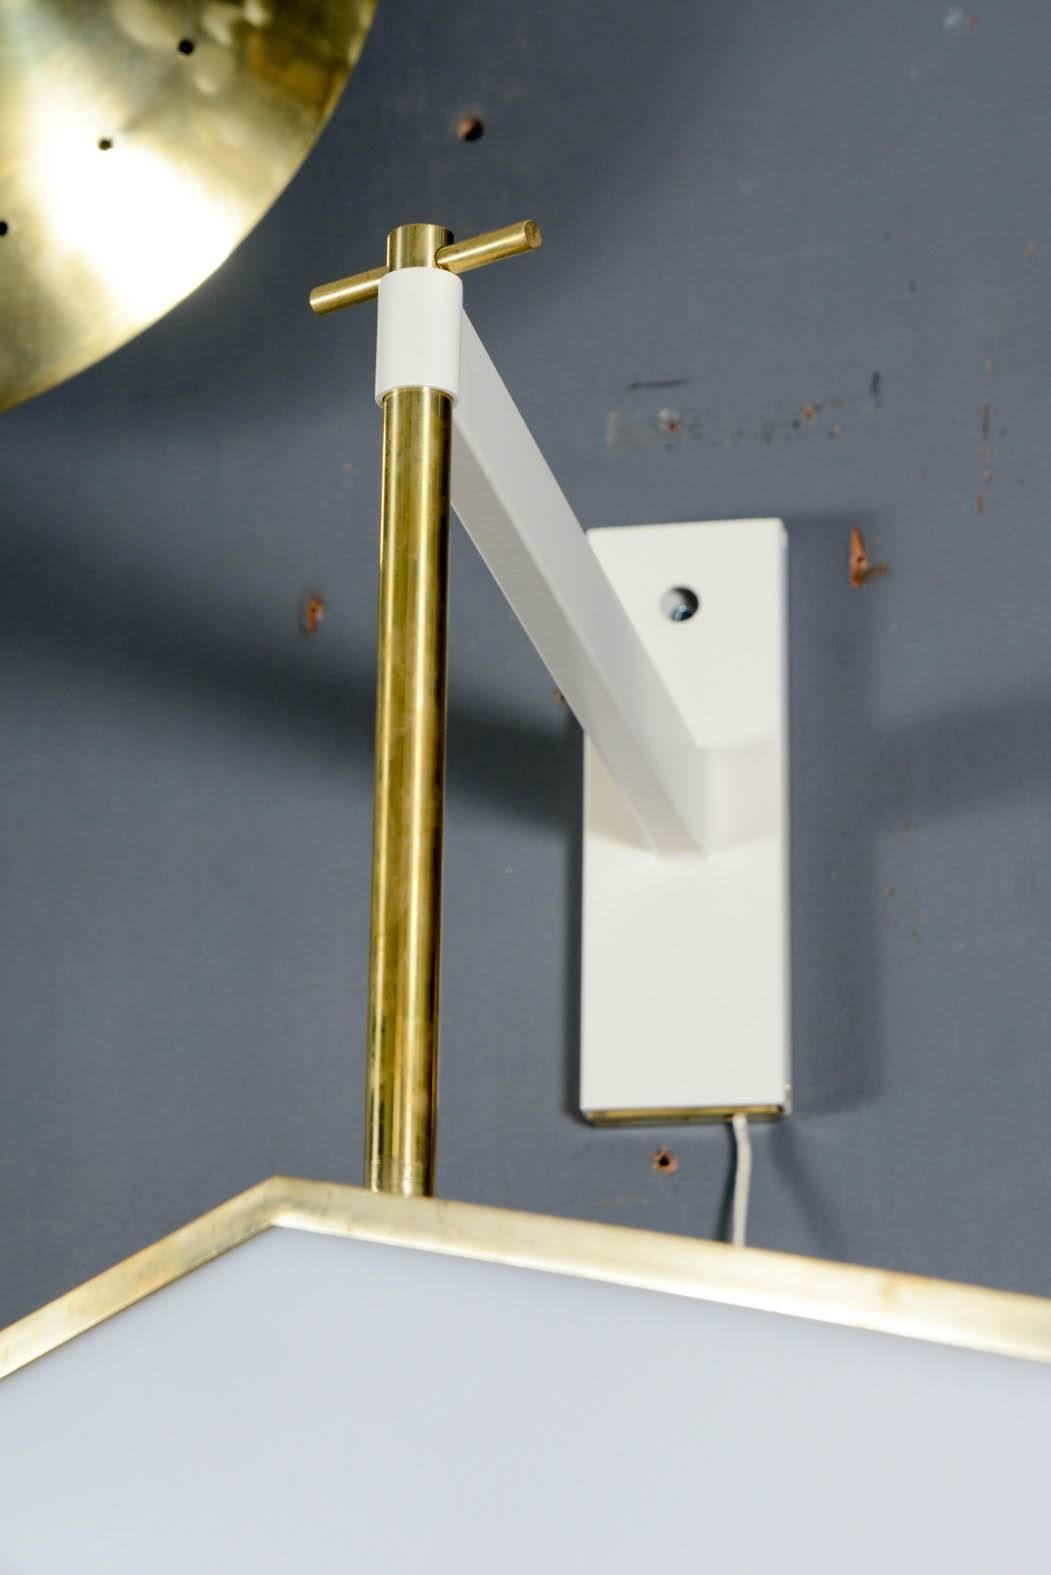 Exceptional wall sconces realized by Diego Mardegan.
White enameled structure holding a brass sconce with perforated metal sides and plexiglass panels.

Signed by the artist, new electrification, perfect condition.